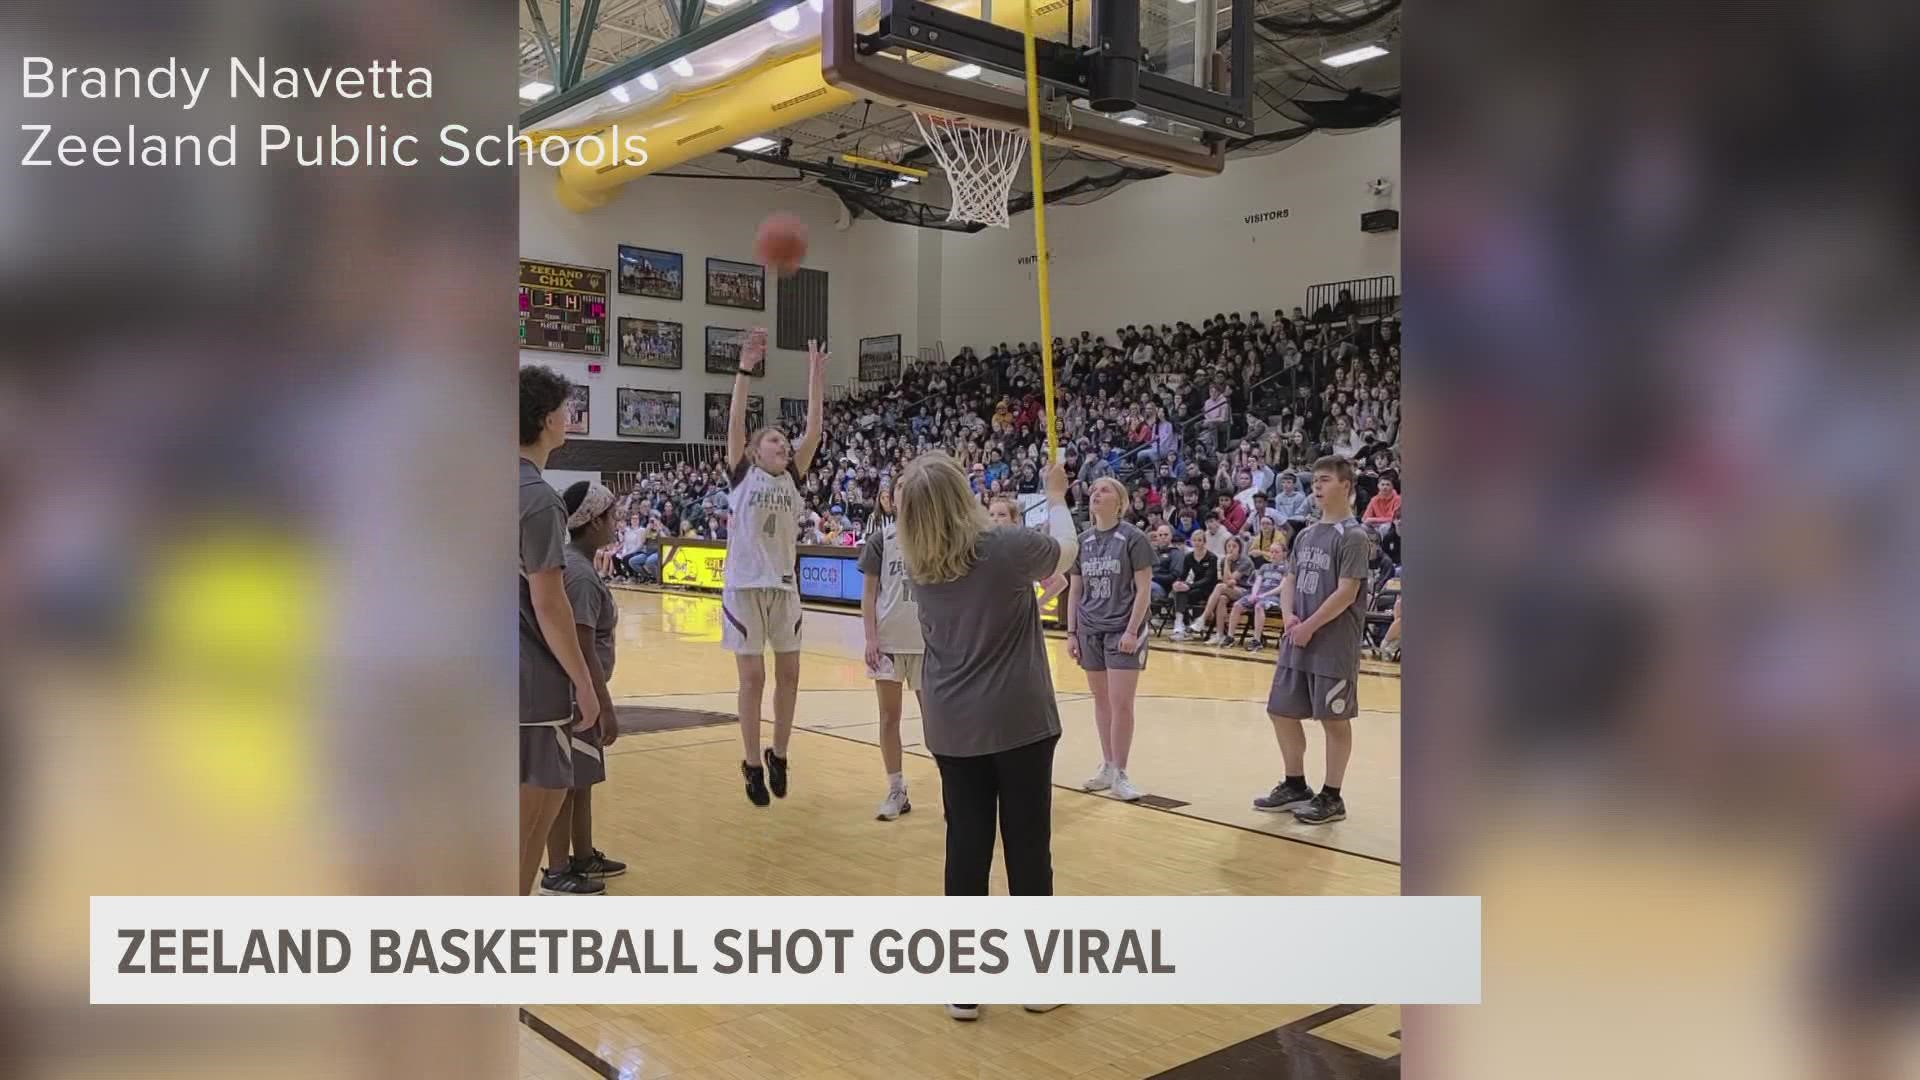 With the support of her teammates, Jules Hoogland, who is blind, sunk a basket causing the whole crowd to go wild.